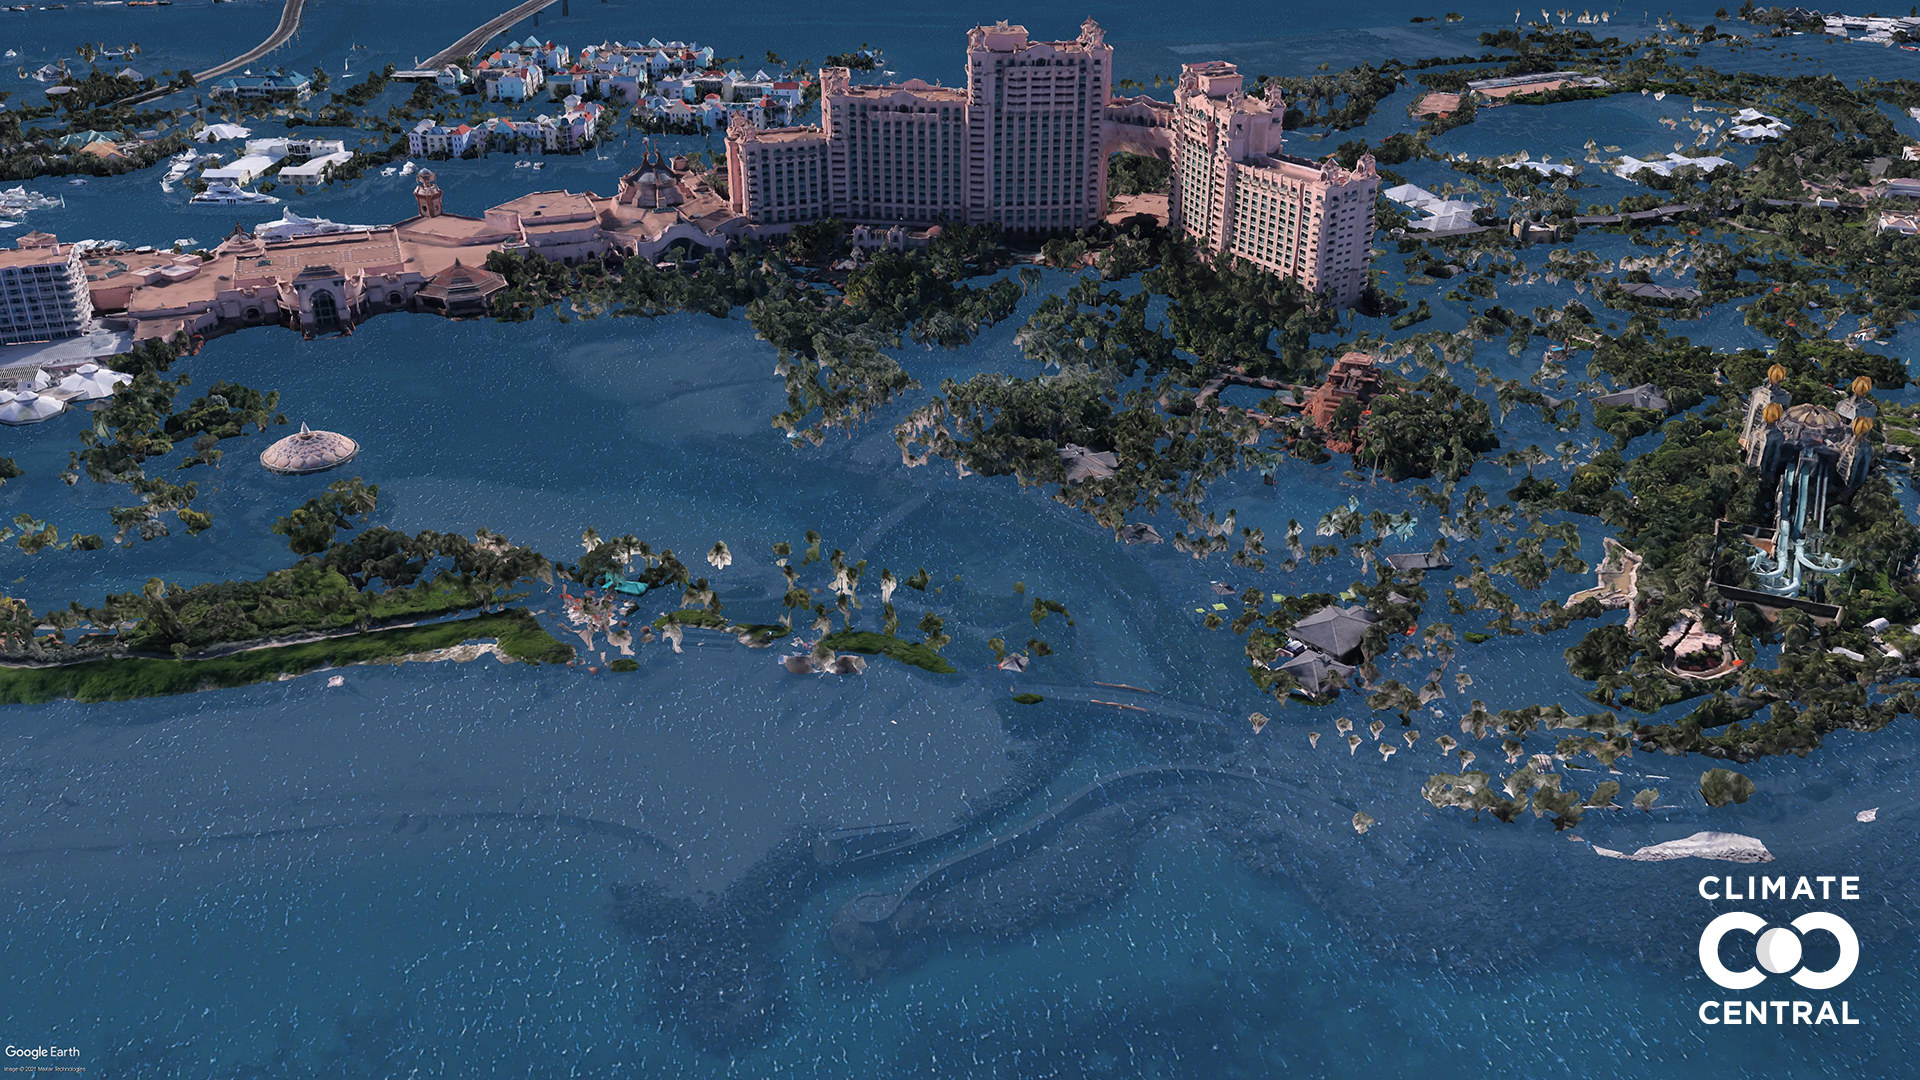 Water covers the beaches and grounds surrounding Atlantis